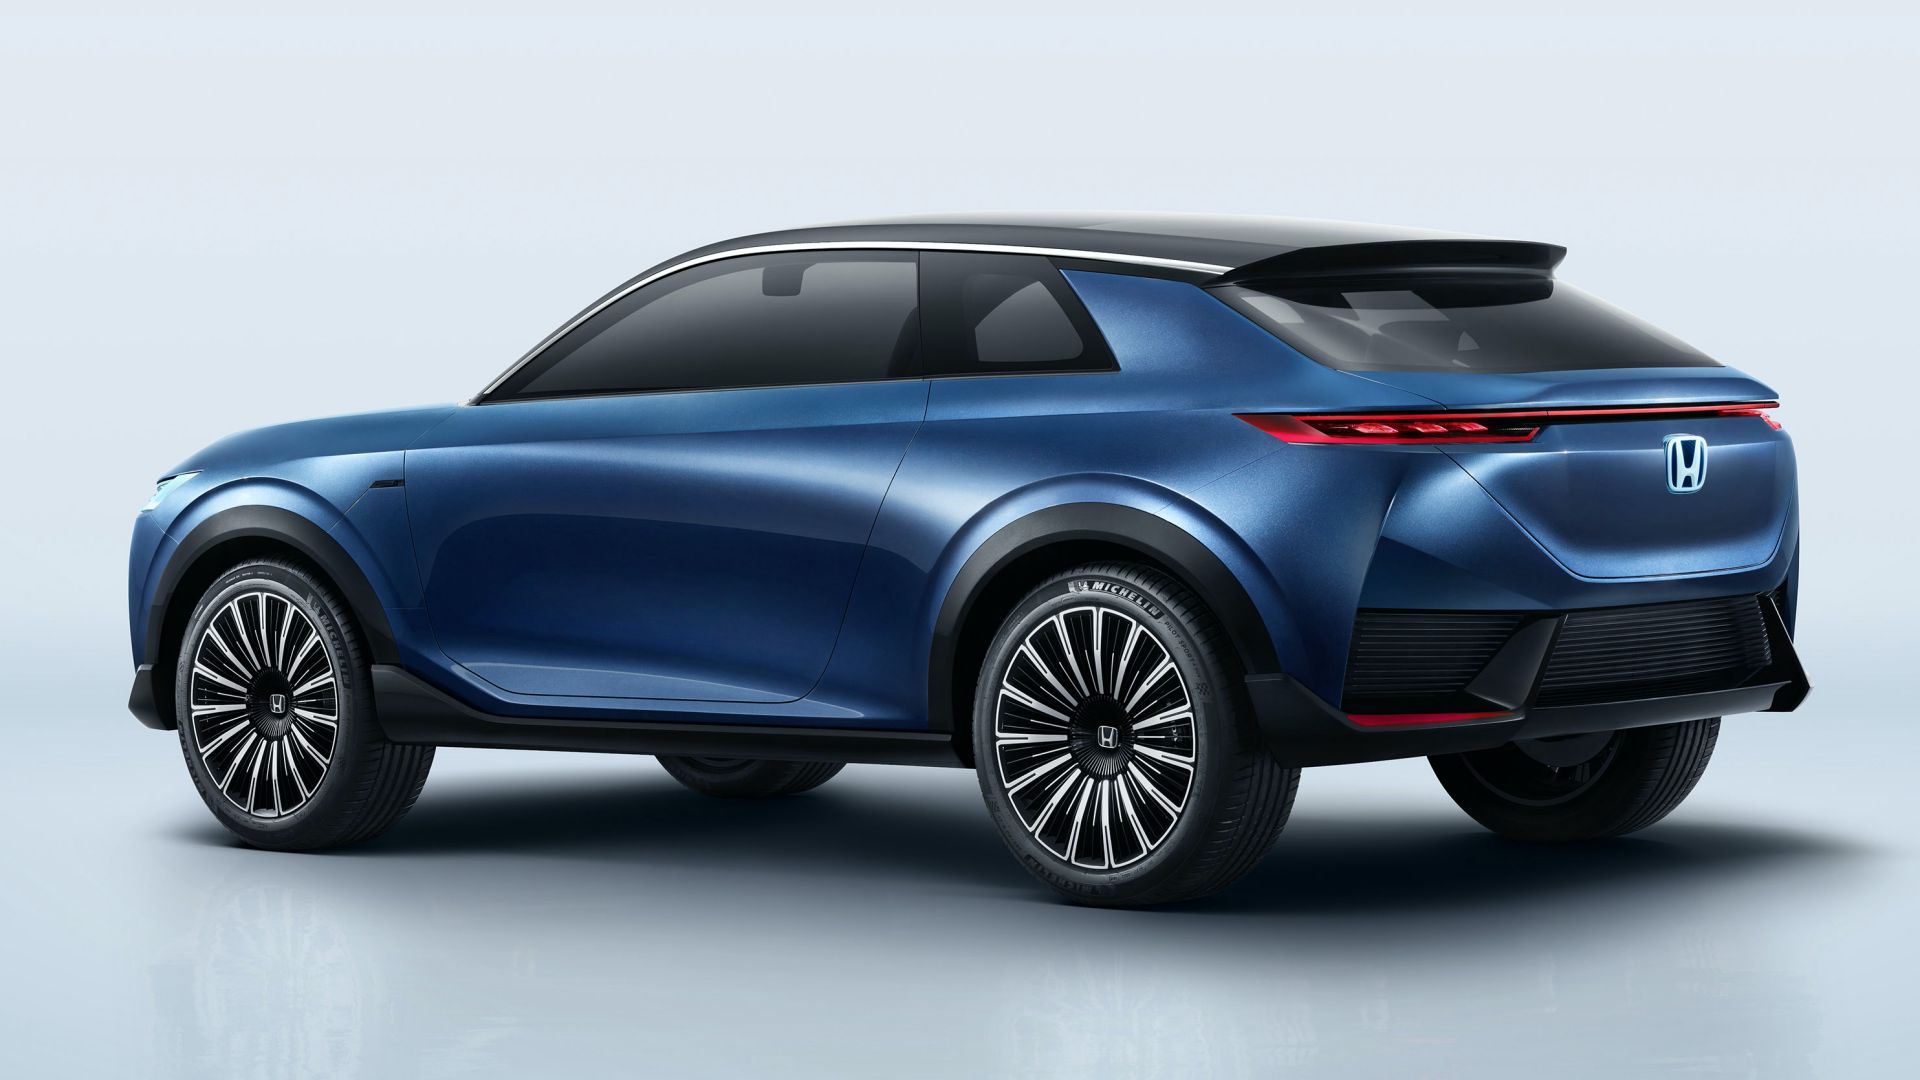 Honda SUV e:concept Is An Enticing Preview Of The Brand's First EV For